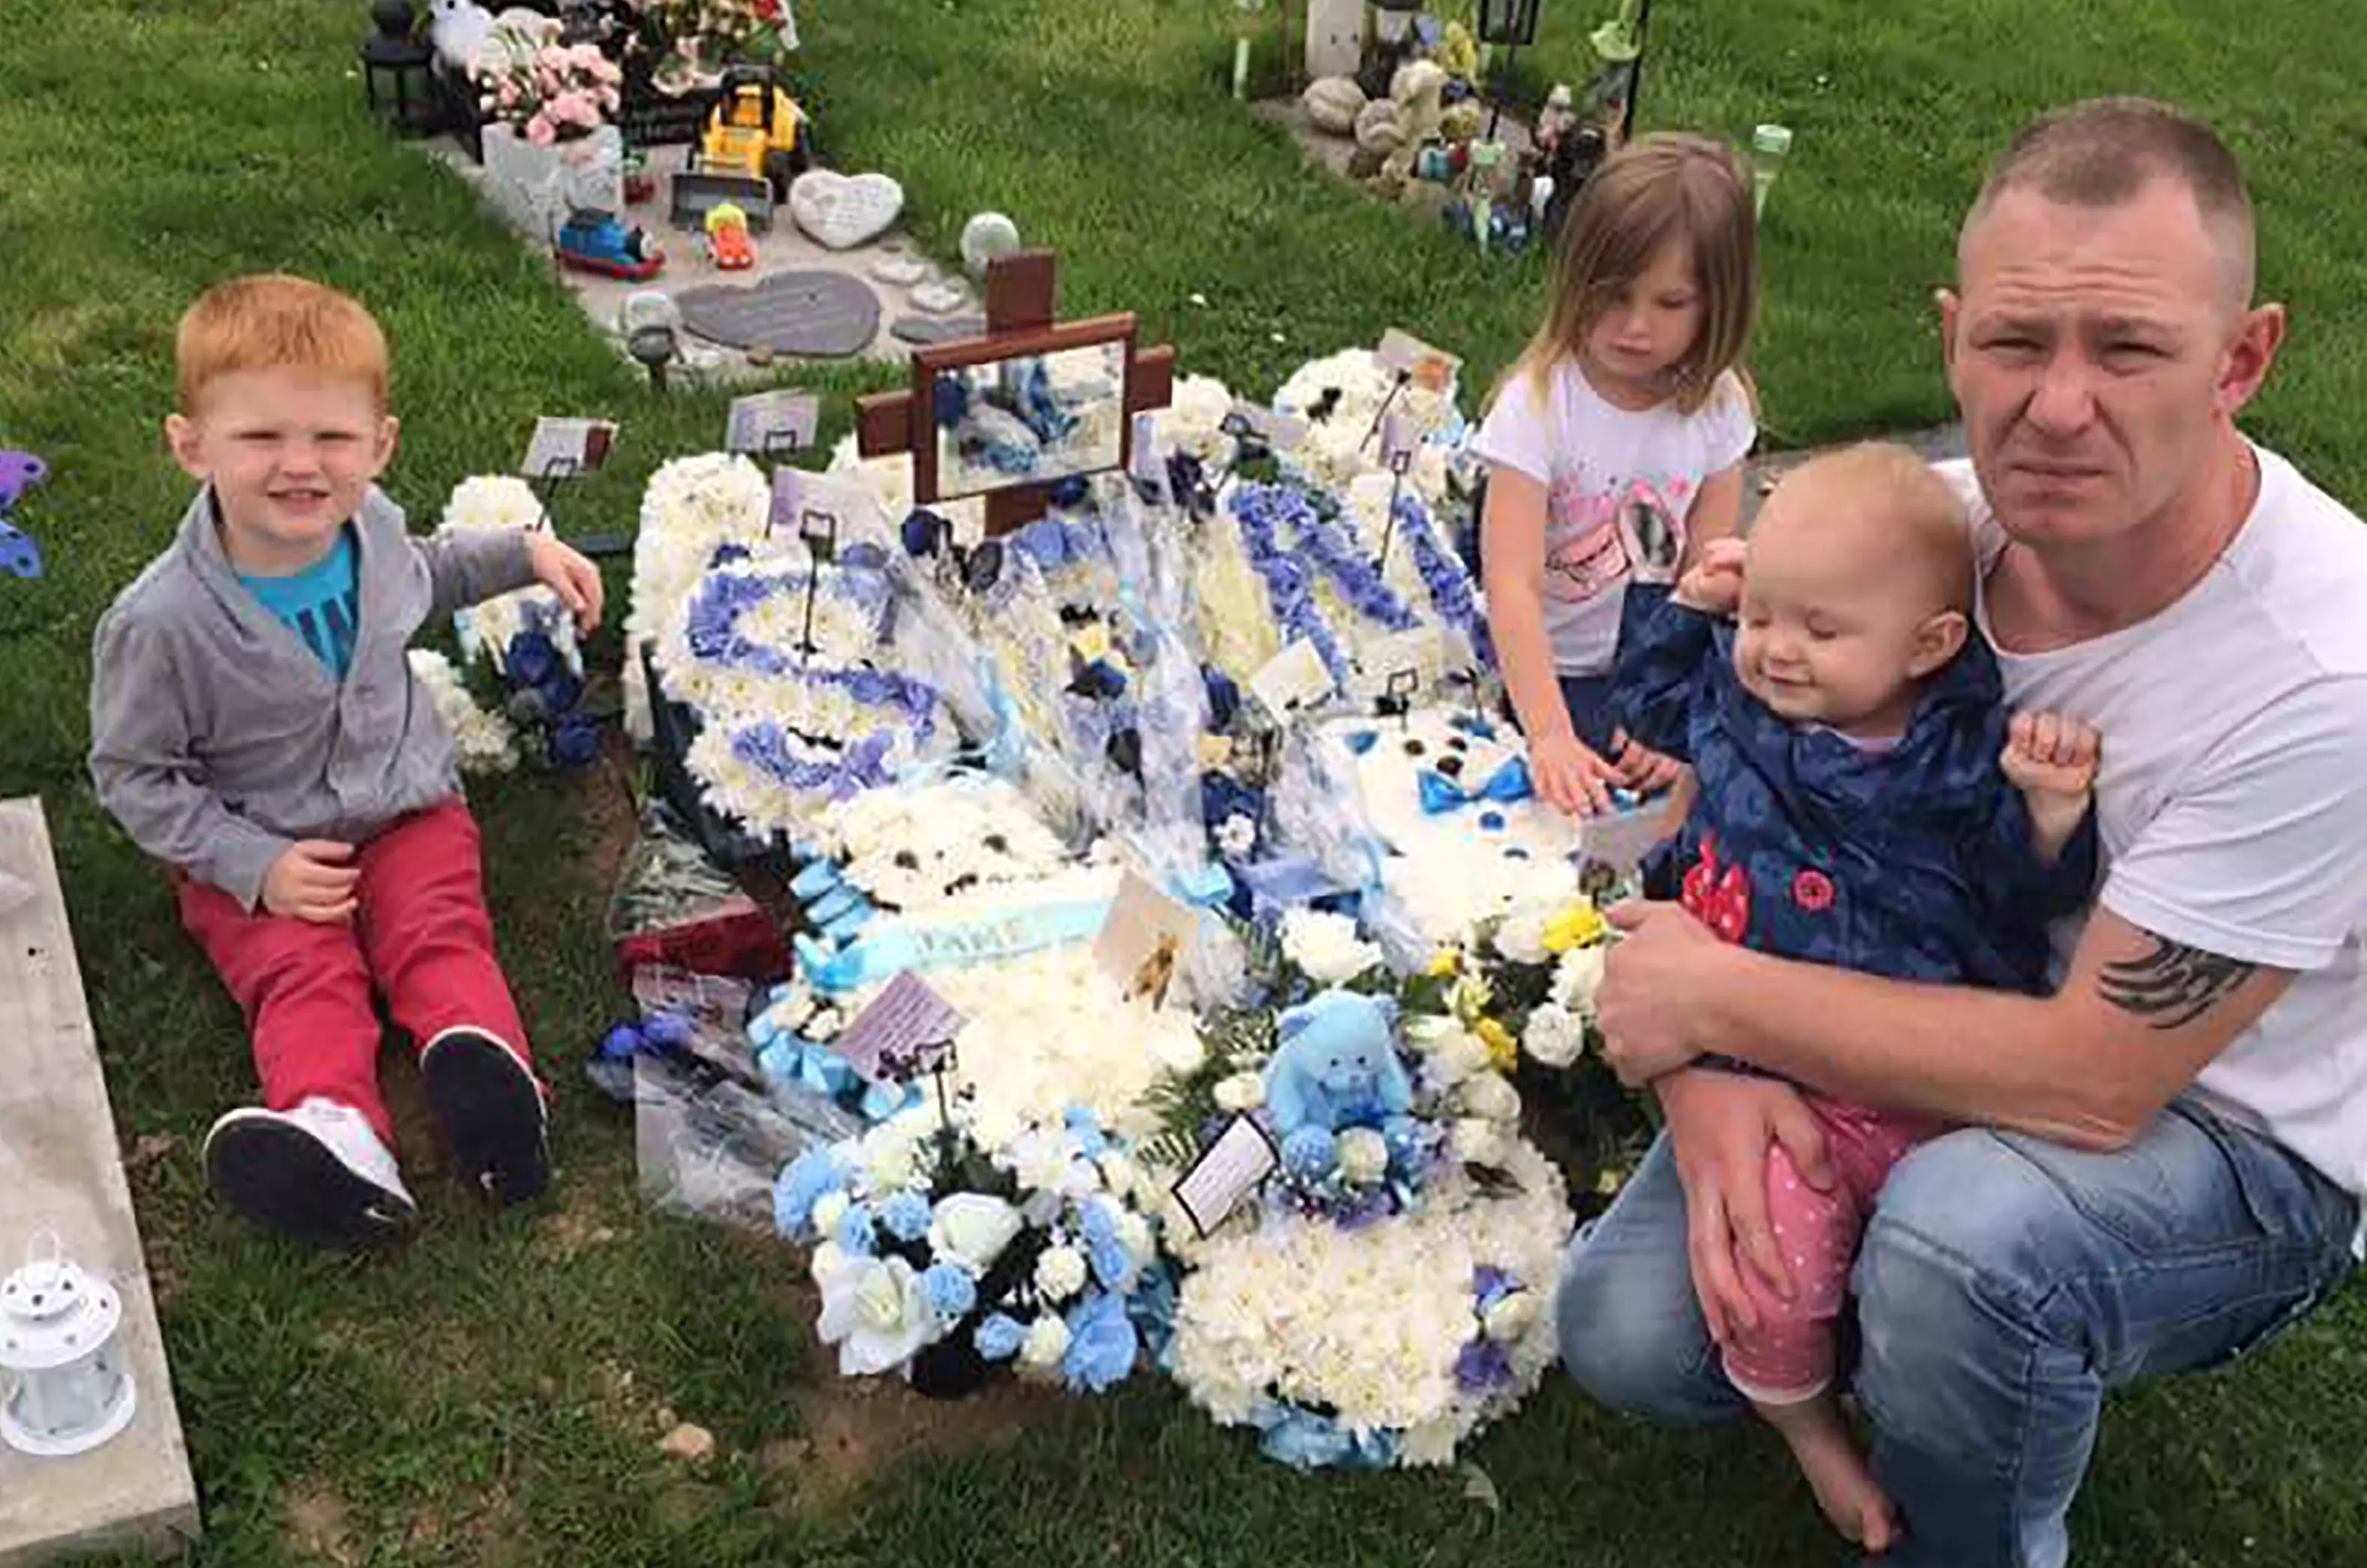 Parents Ordered To Remove A DIY Wooden Headstone From Their Son’s Grave